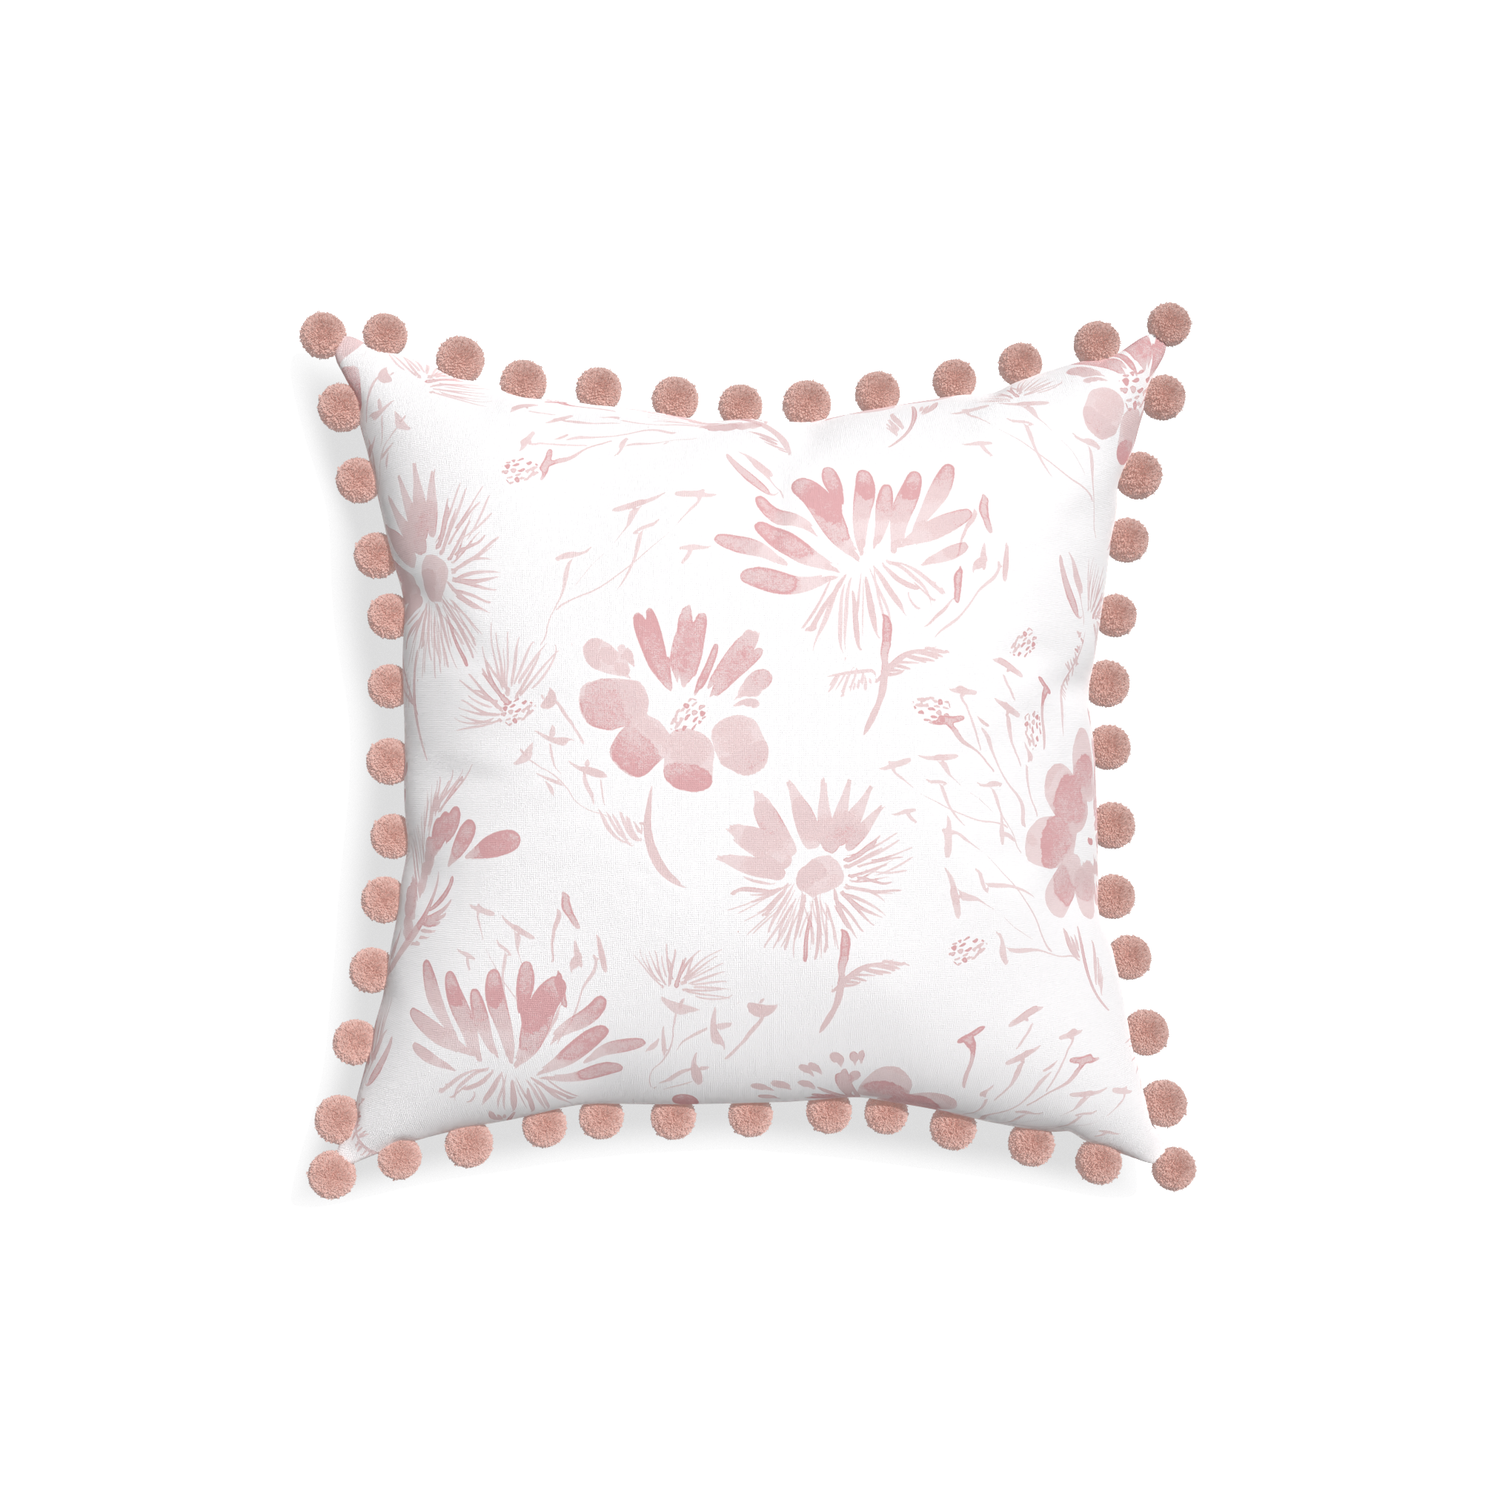 18-square blake custom pink floralpillow with rose pom pom on white background